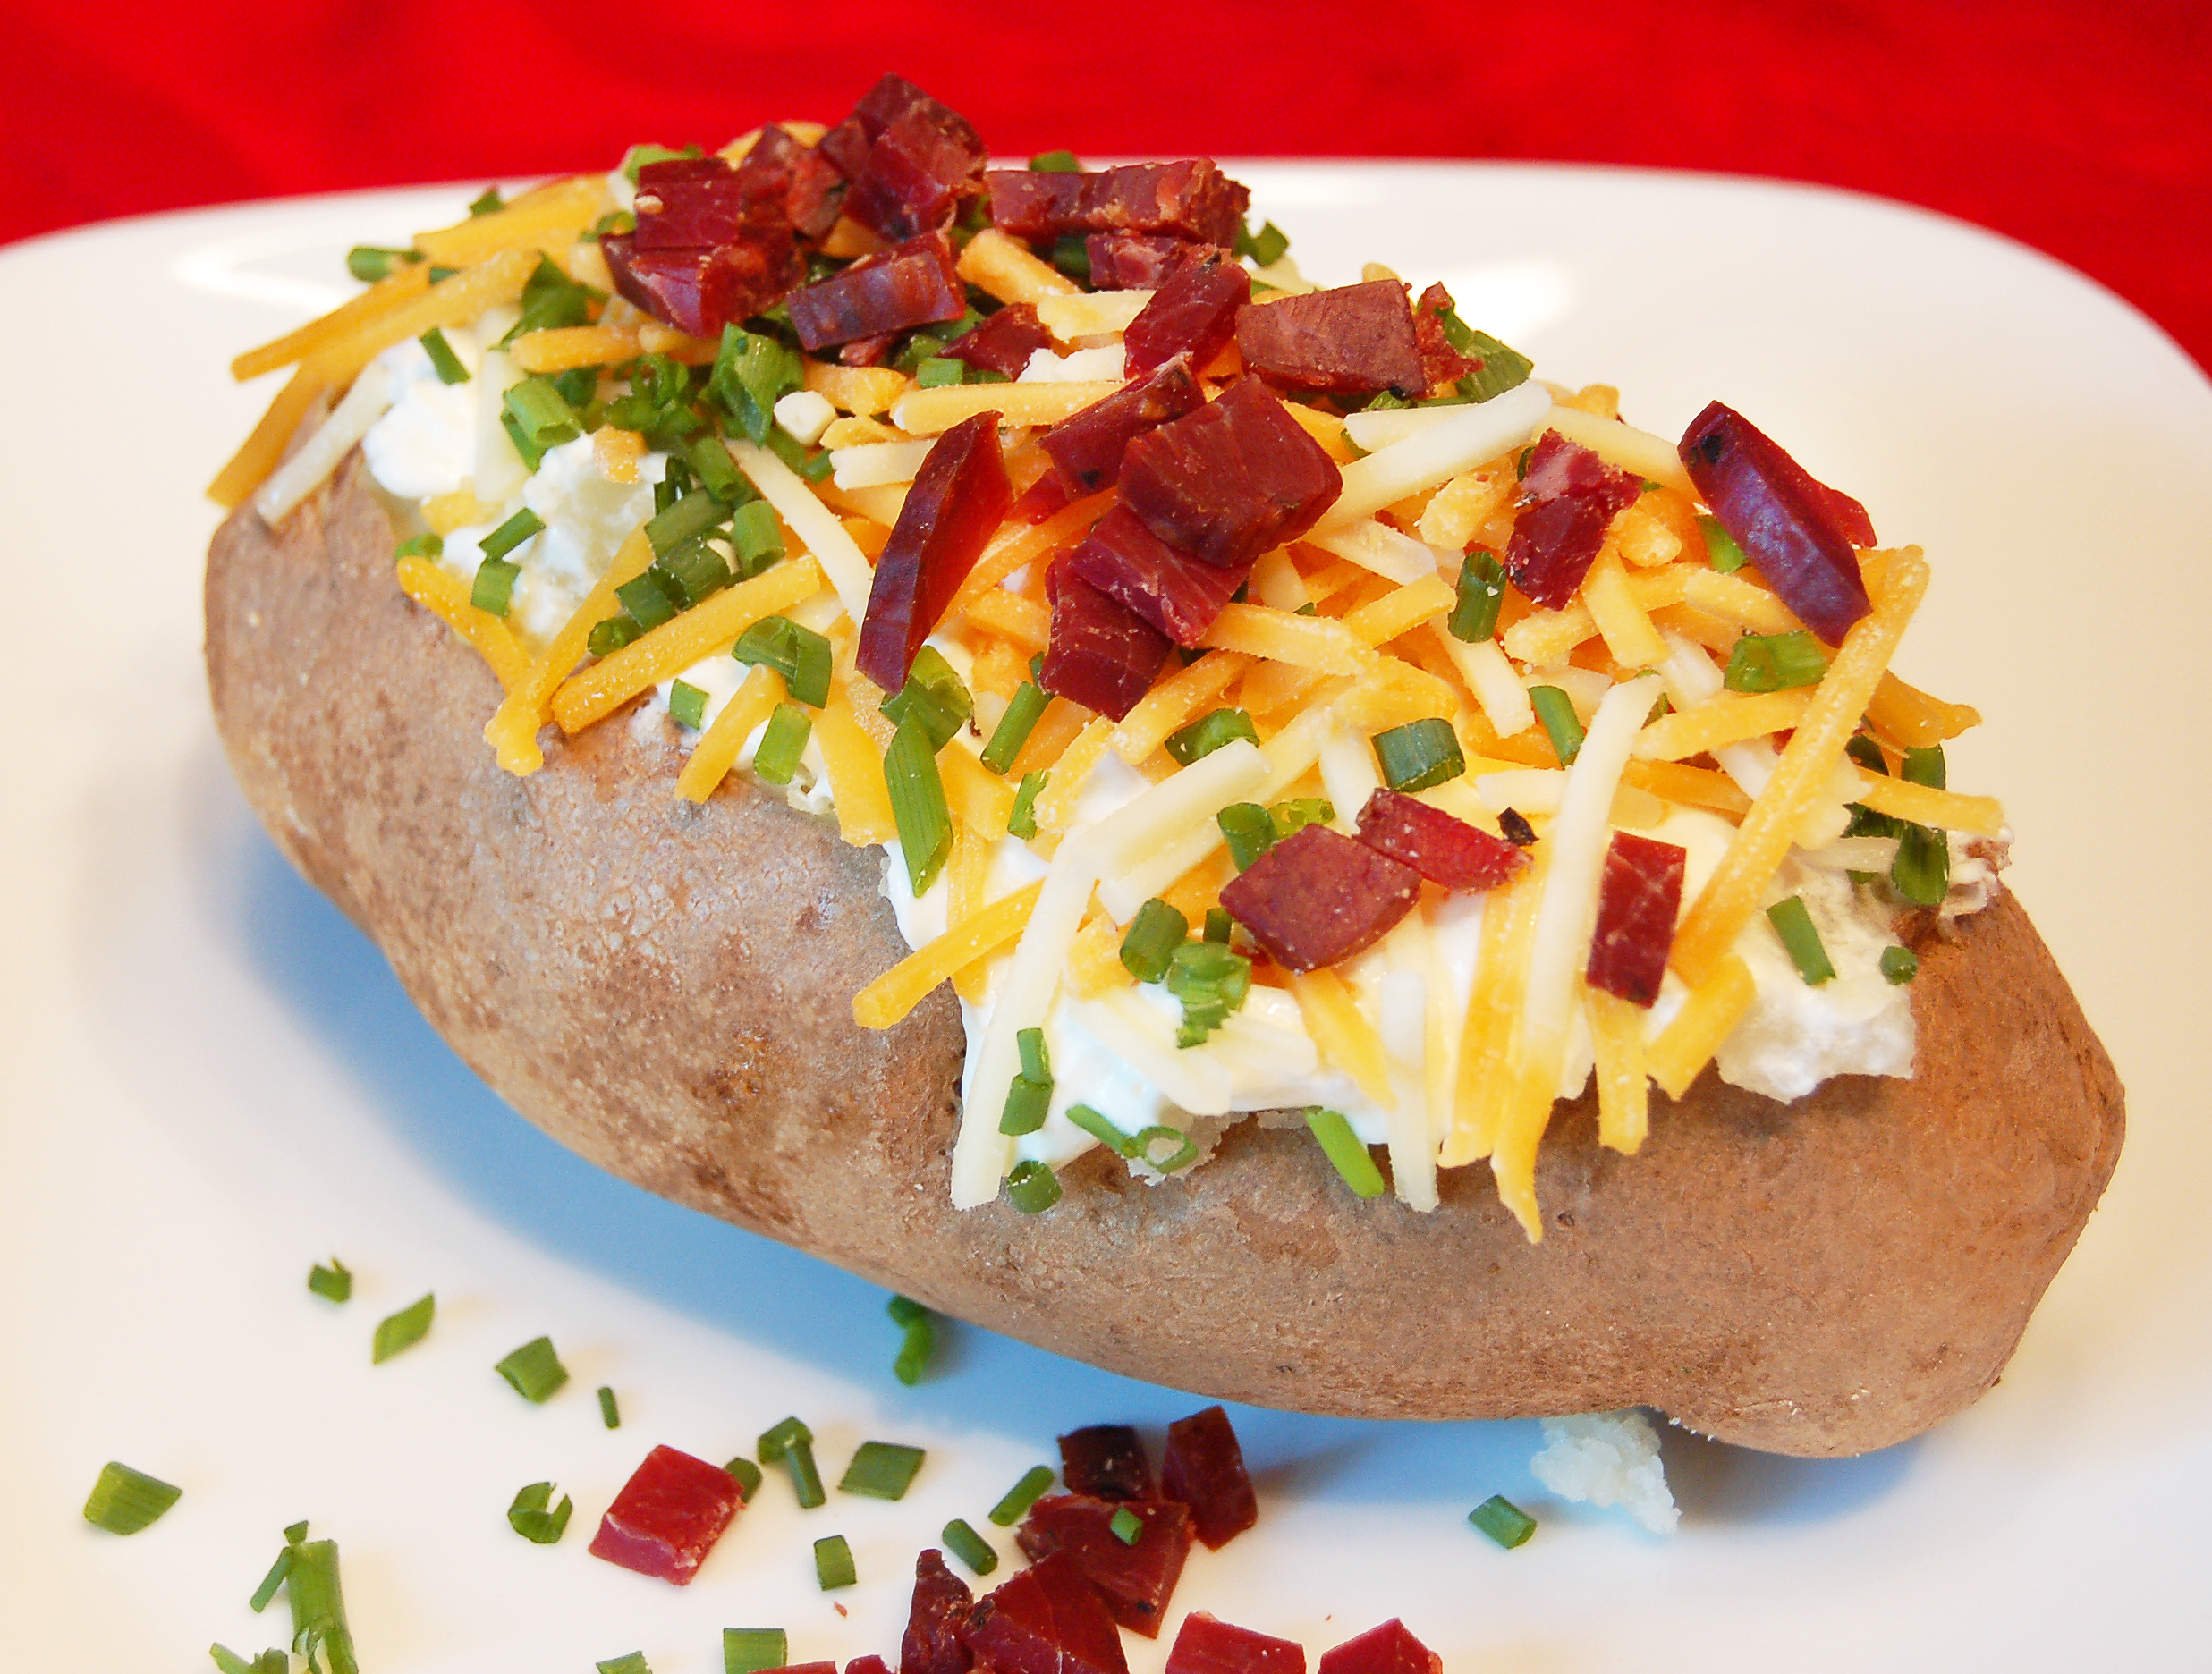 Free Baked Potatoes Cliparts, Download Free Clip Art, Free.